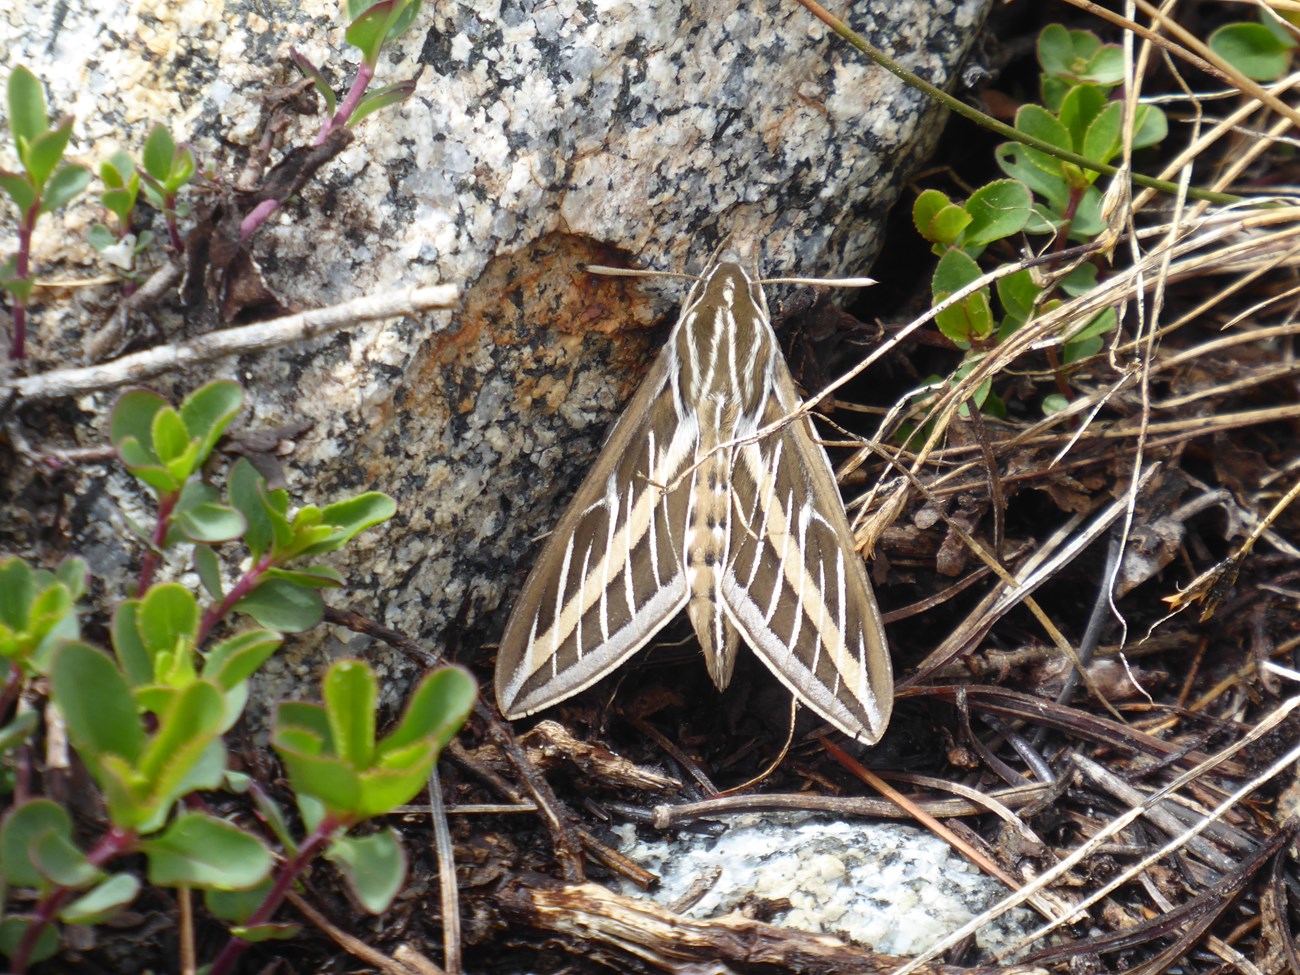 A view of a white-lined sphinx moth showing the brown wings with wide stripes down the center and ends of the wings and narrow white vertical stripes.